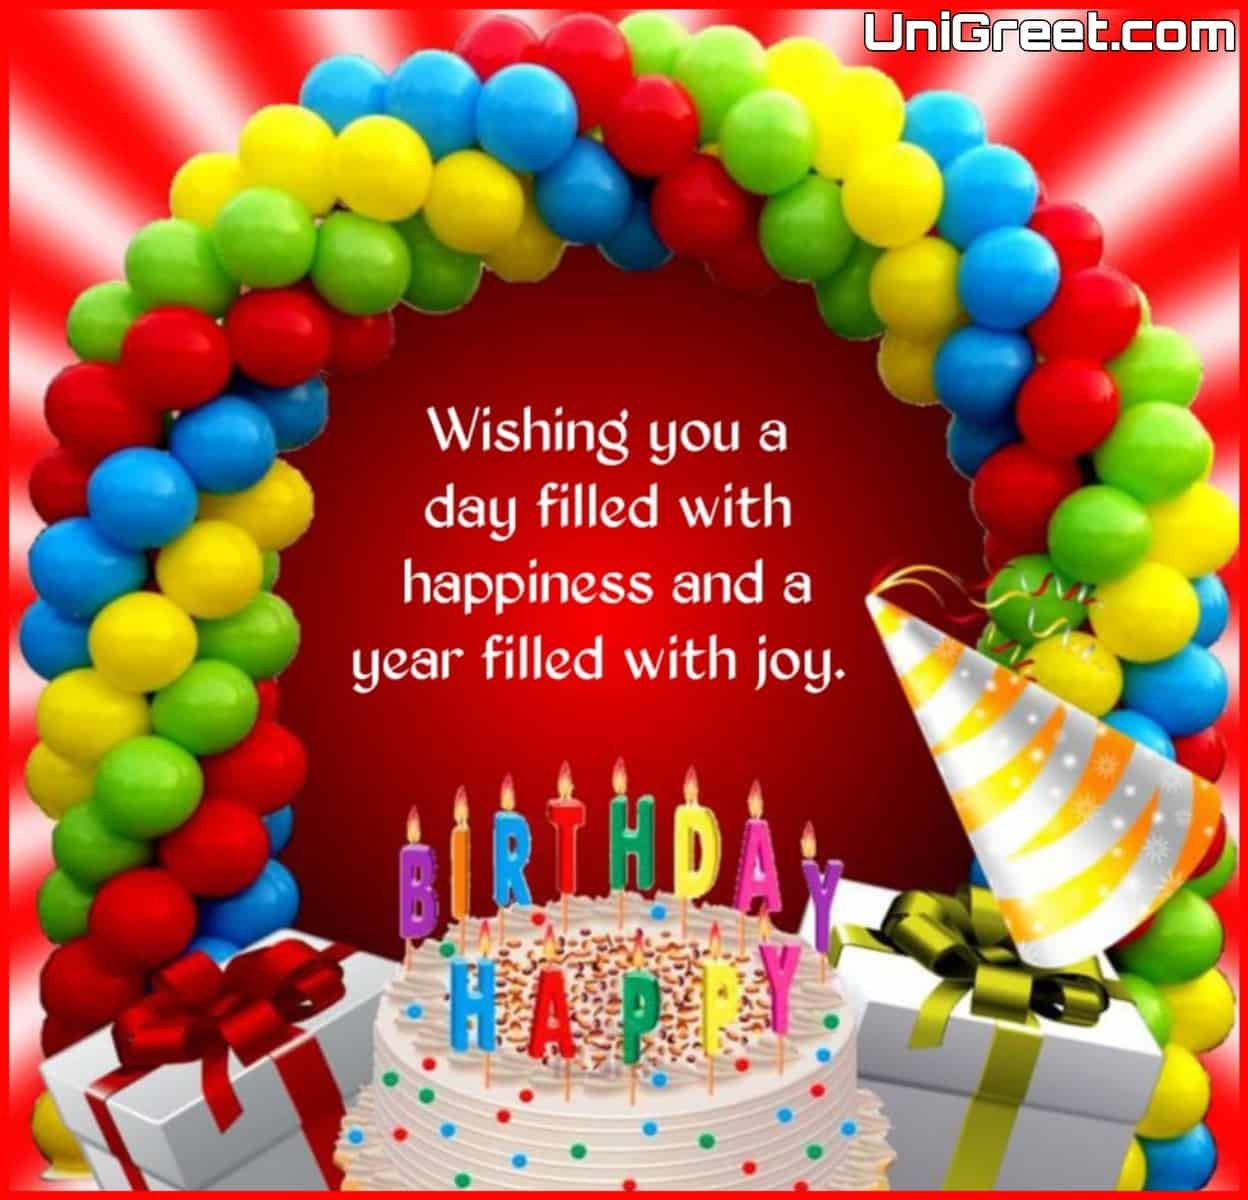 Astonishing Collection of Full 4K Birthday Wishes Images – Over 999+ Top Picks